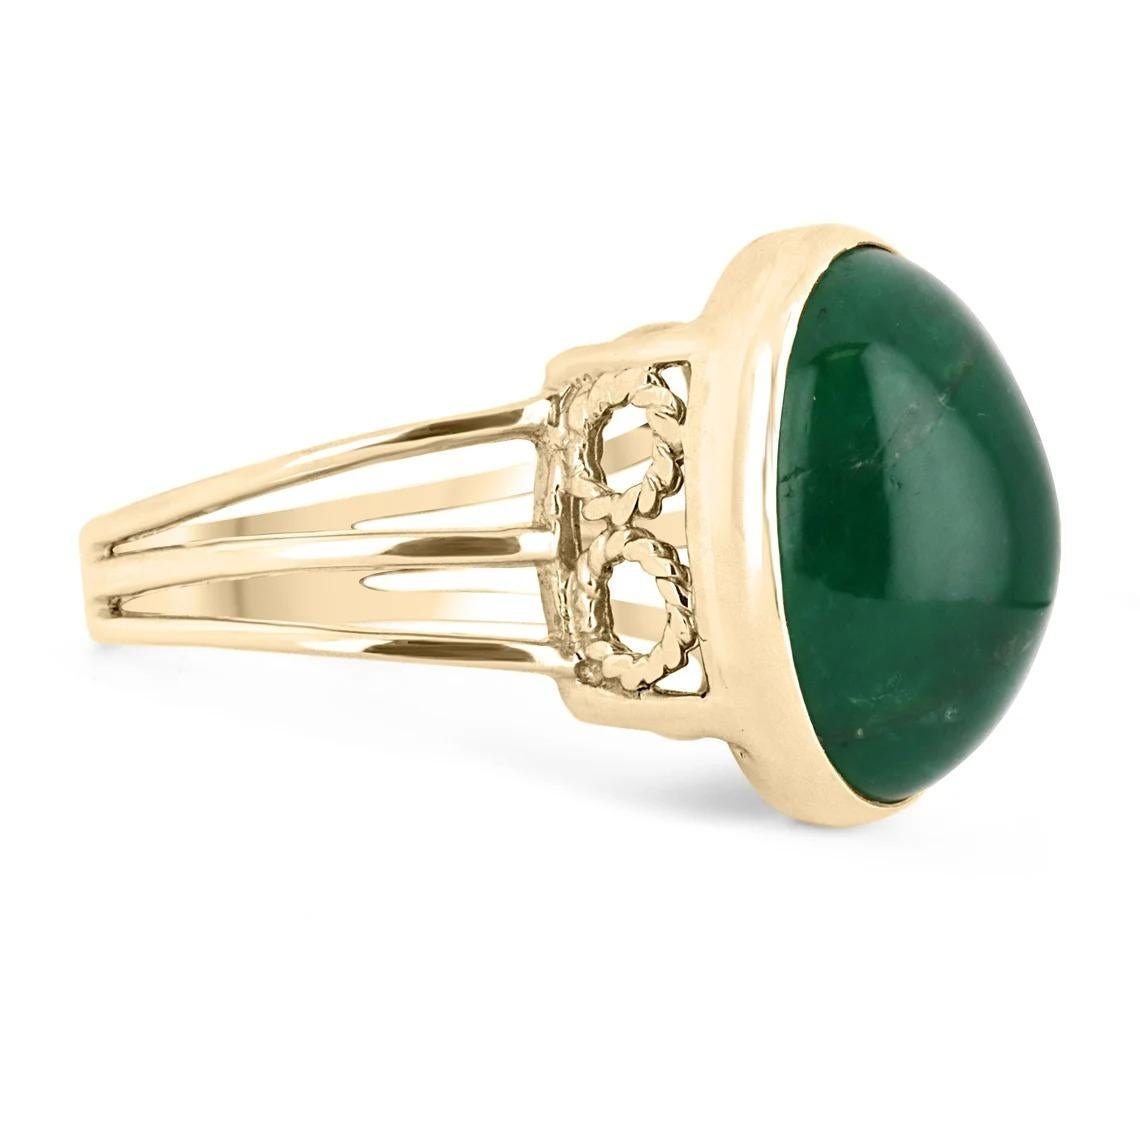 Displayed is a HUGE & RARE oval cabochon Colombian emerald solitaire ring in 14K yellow gold. This gorgeous solitaire ring carries a full 15.77-carat emerald in a secure bezel setting. The emerald is translucent and showcases a gorgeous deep forest